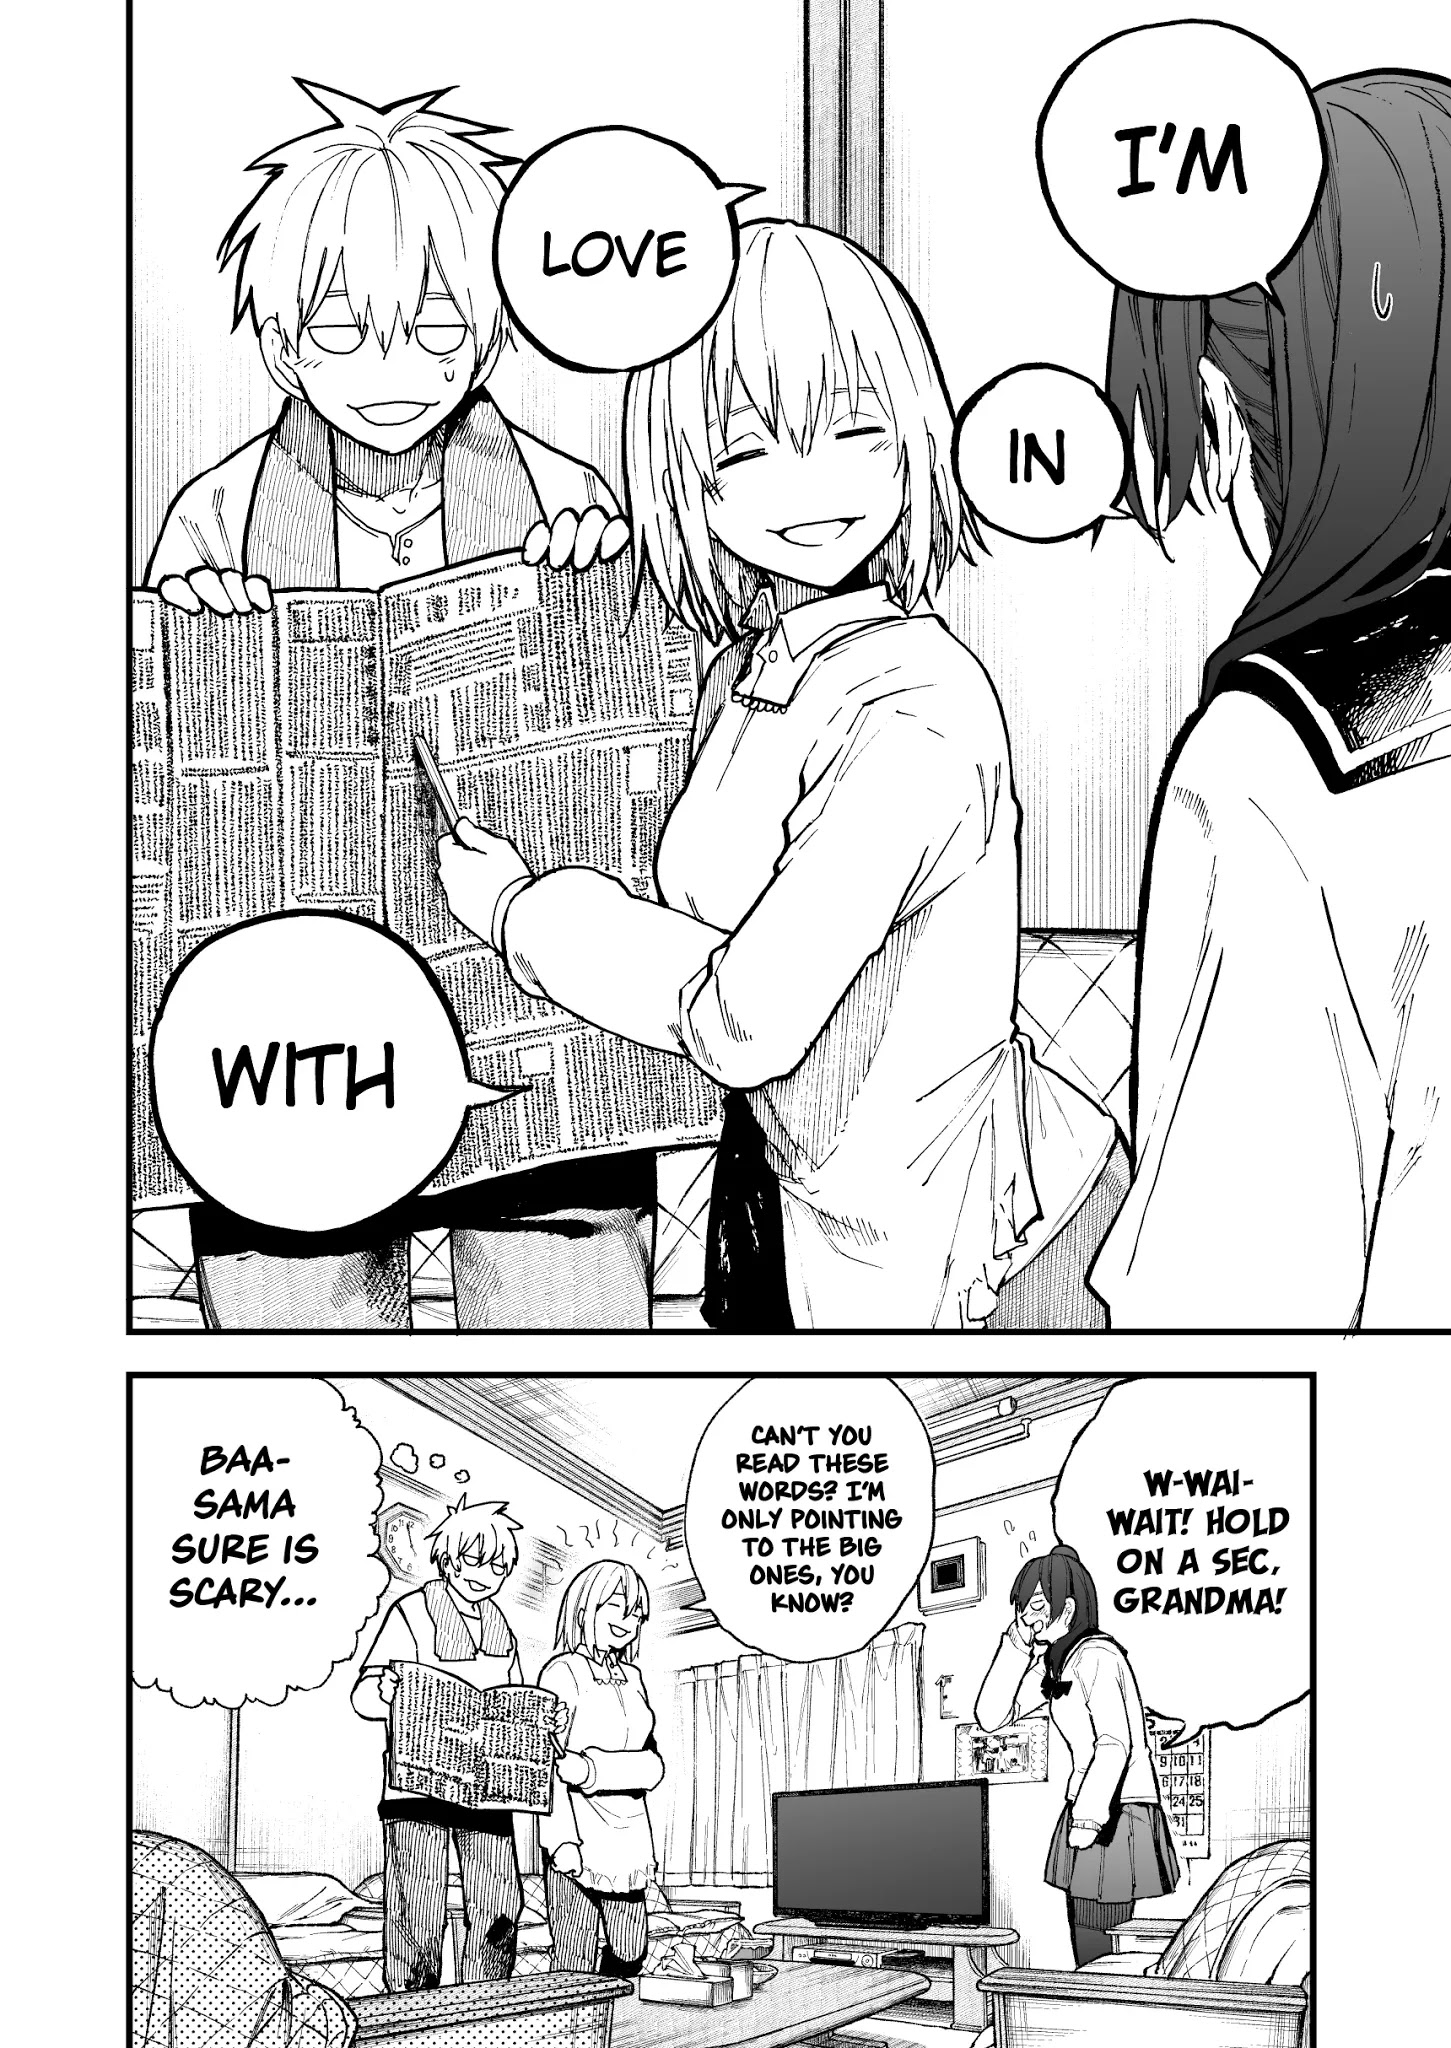 A Story About A Grampa And Granma Returned Back To Their Youth. Chapter 42